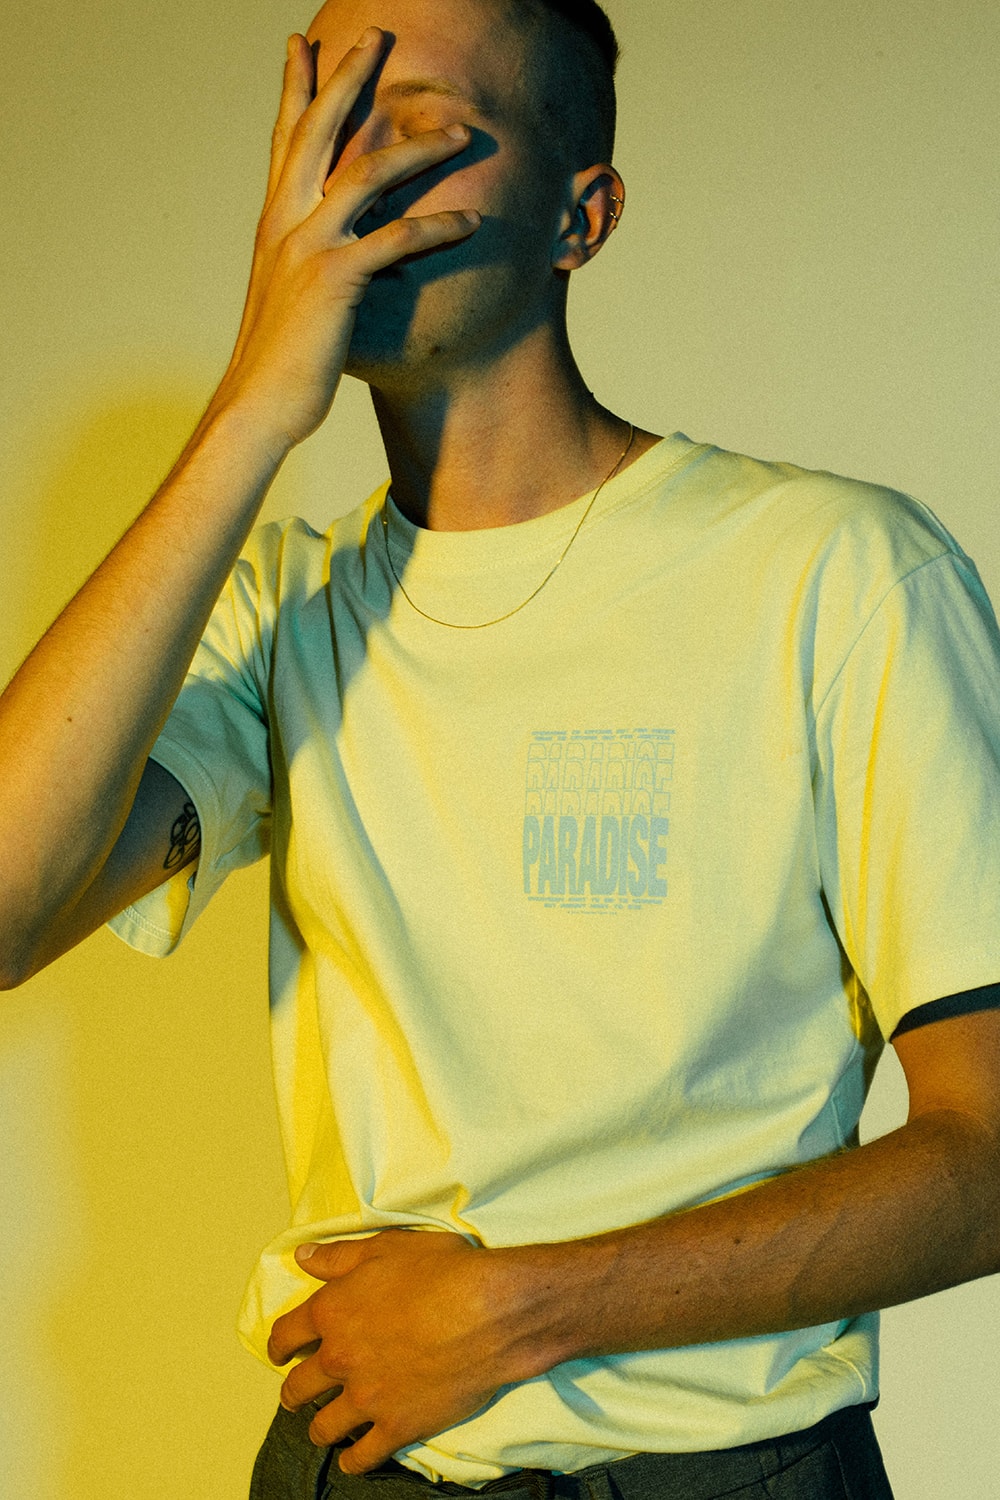 Paradise Youth Club “Mind Benders” Collection | Hypebeast